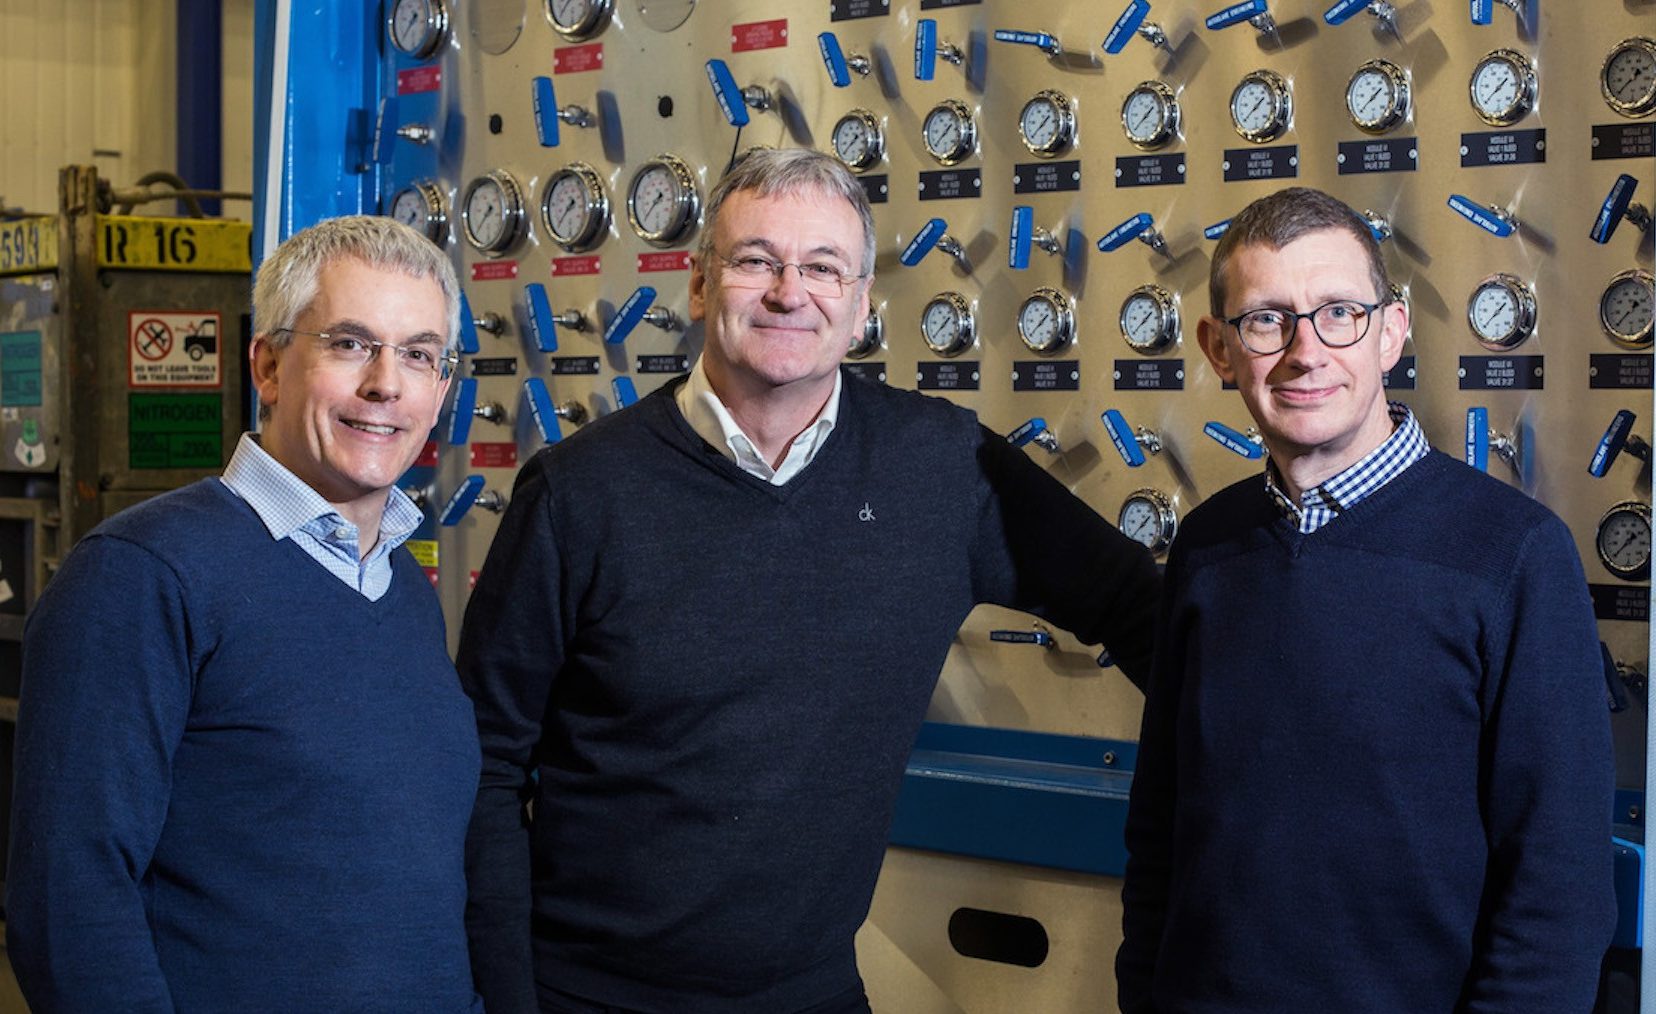 BGF invests £10m in Frontrow Energy Technology Group from left to right: Mike Sibson (BGF), Graeme Coutts (FrontRow Chairman), Stuart Ferguson (FrontRow CEO).